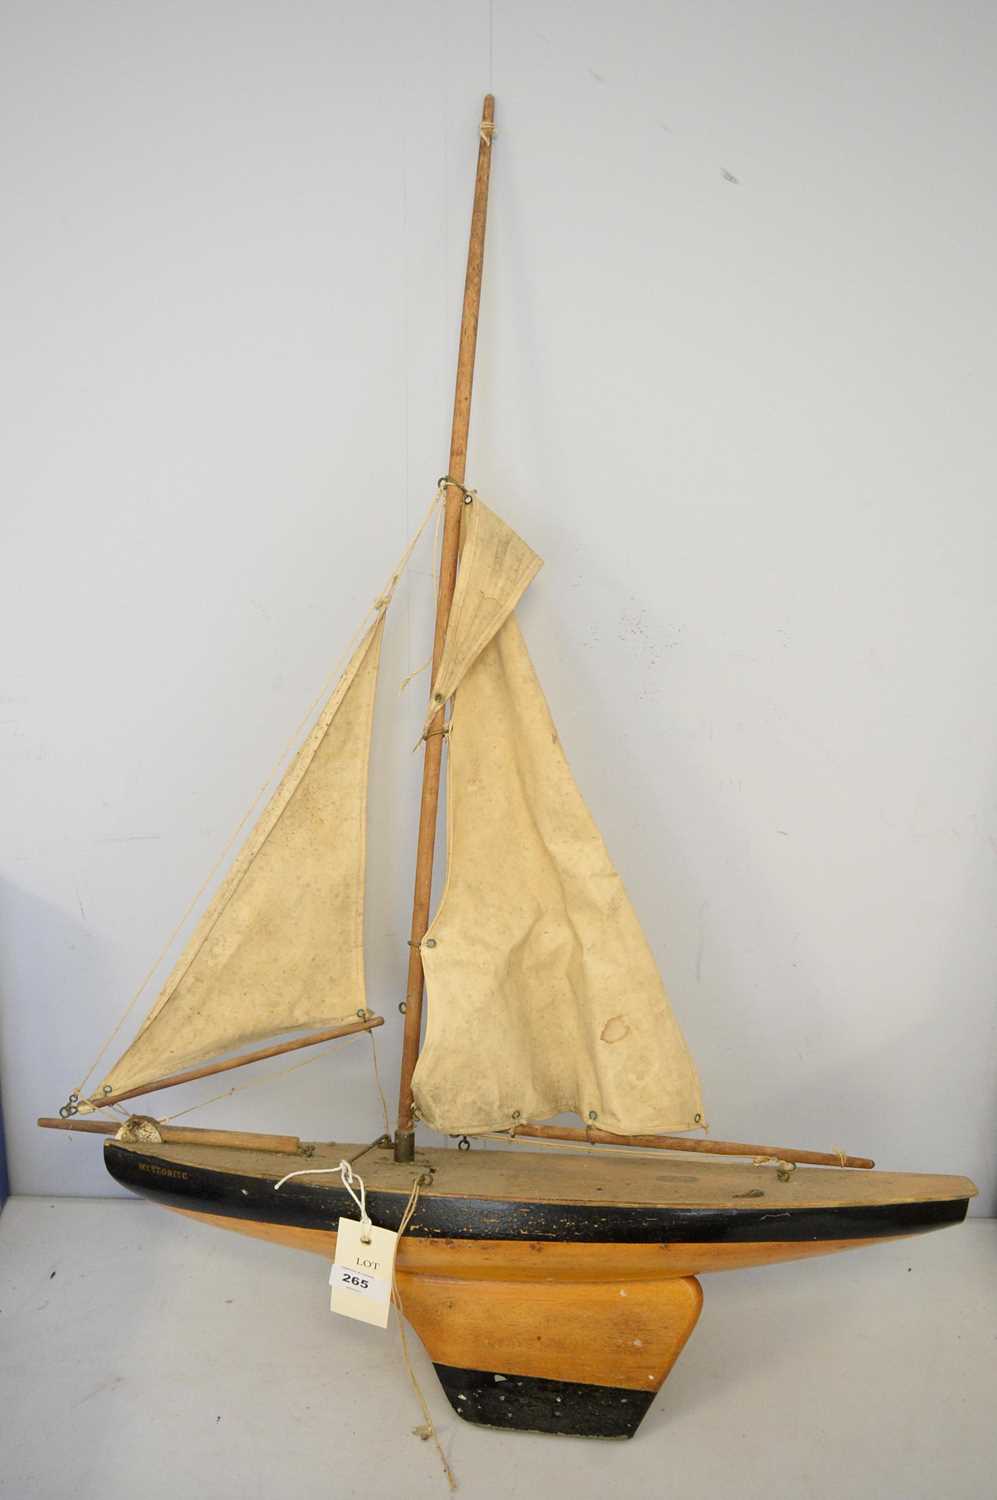 A stained and painted wood model sailing ship ‘Meteorite’.